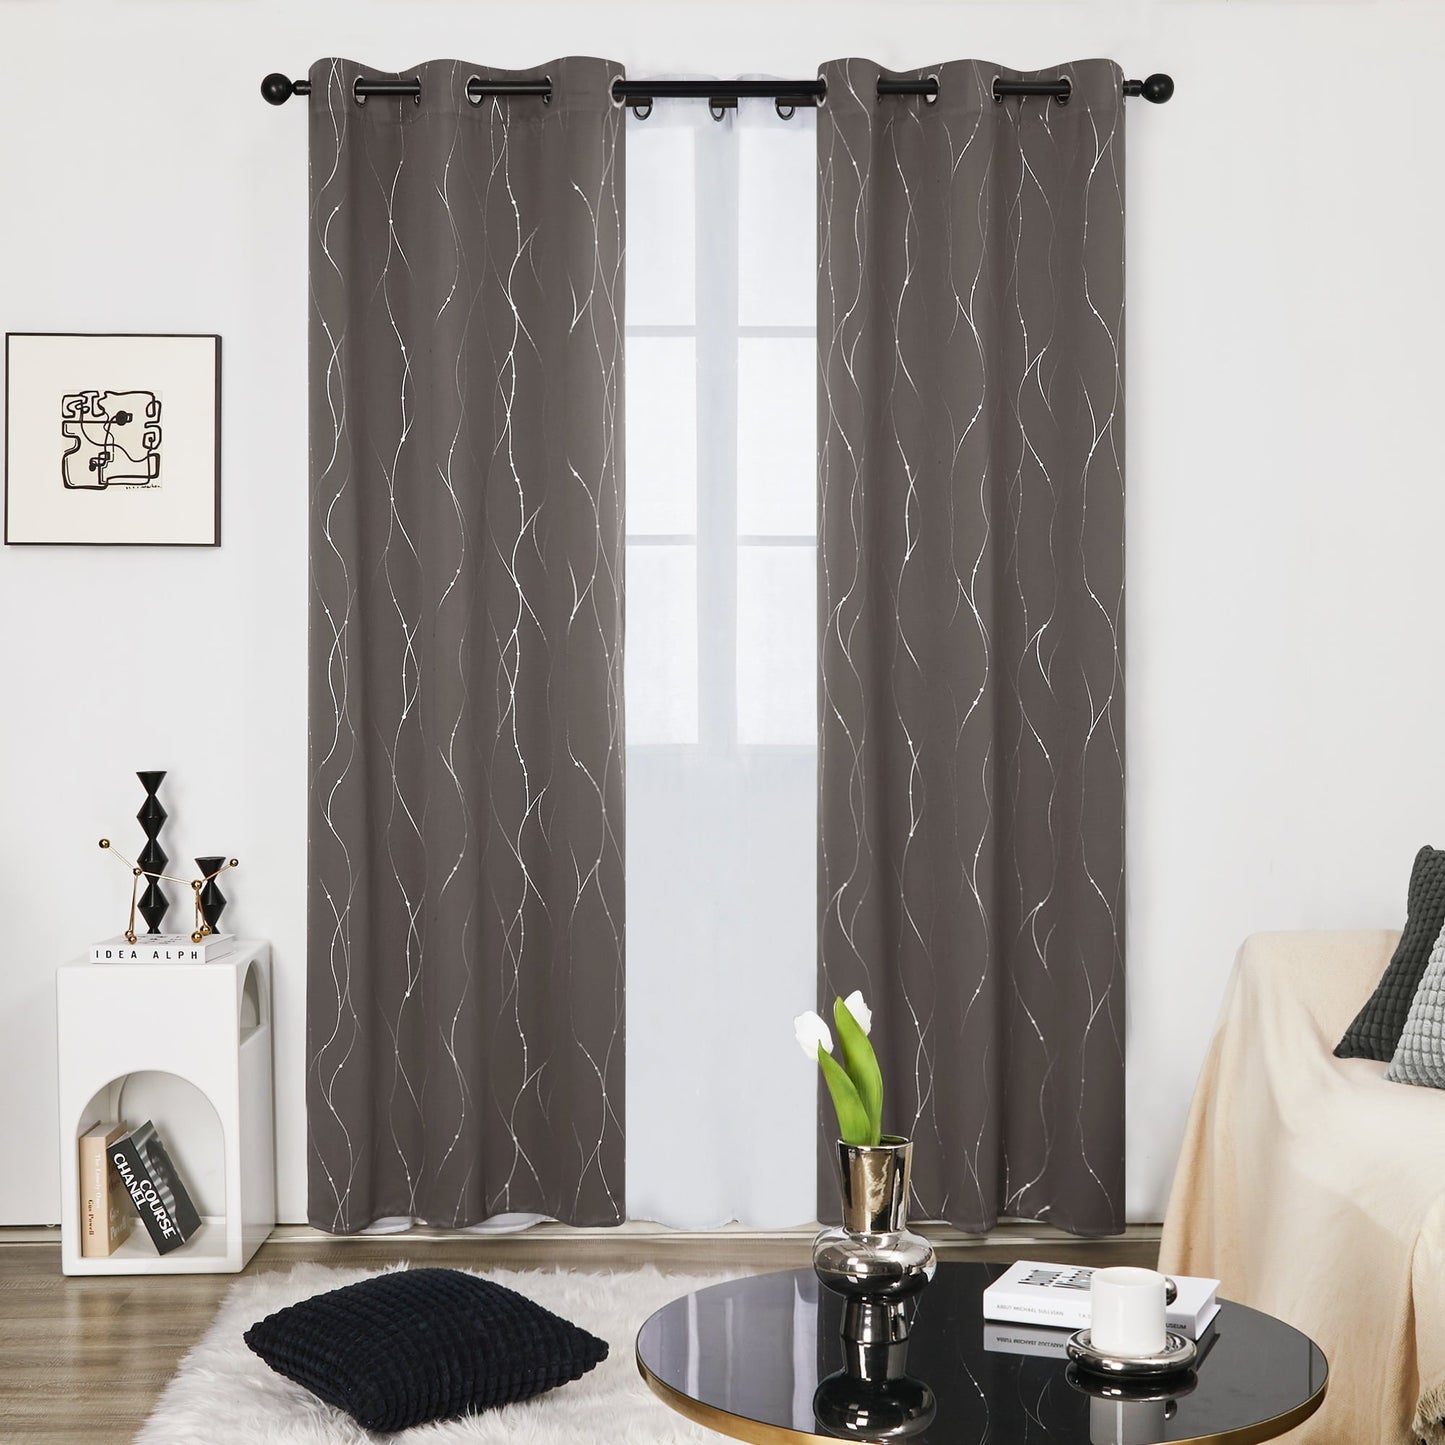 Curtain 2 Panels Size 52x108 Inches Color Taupe